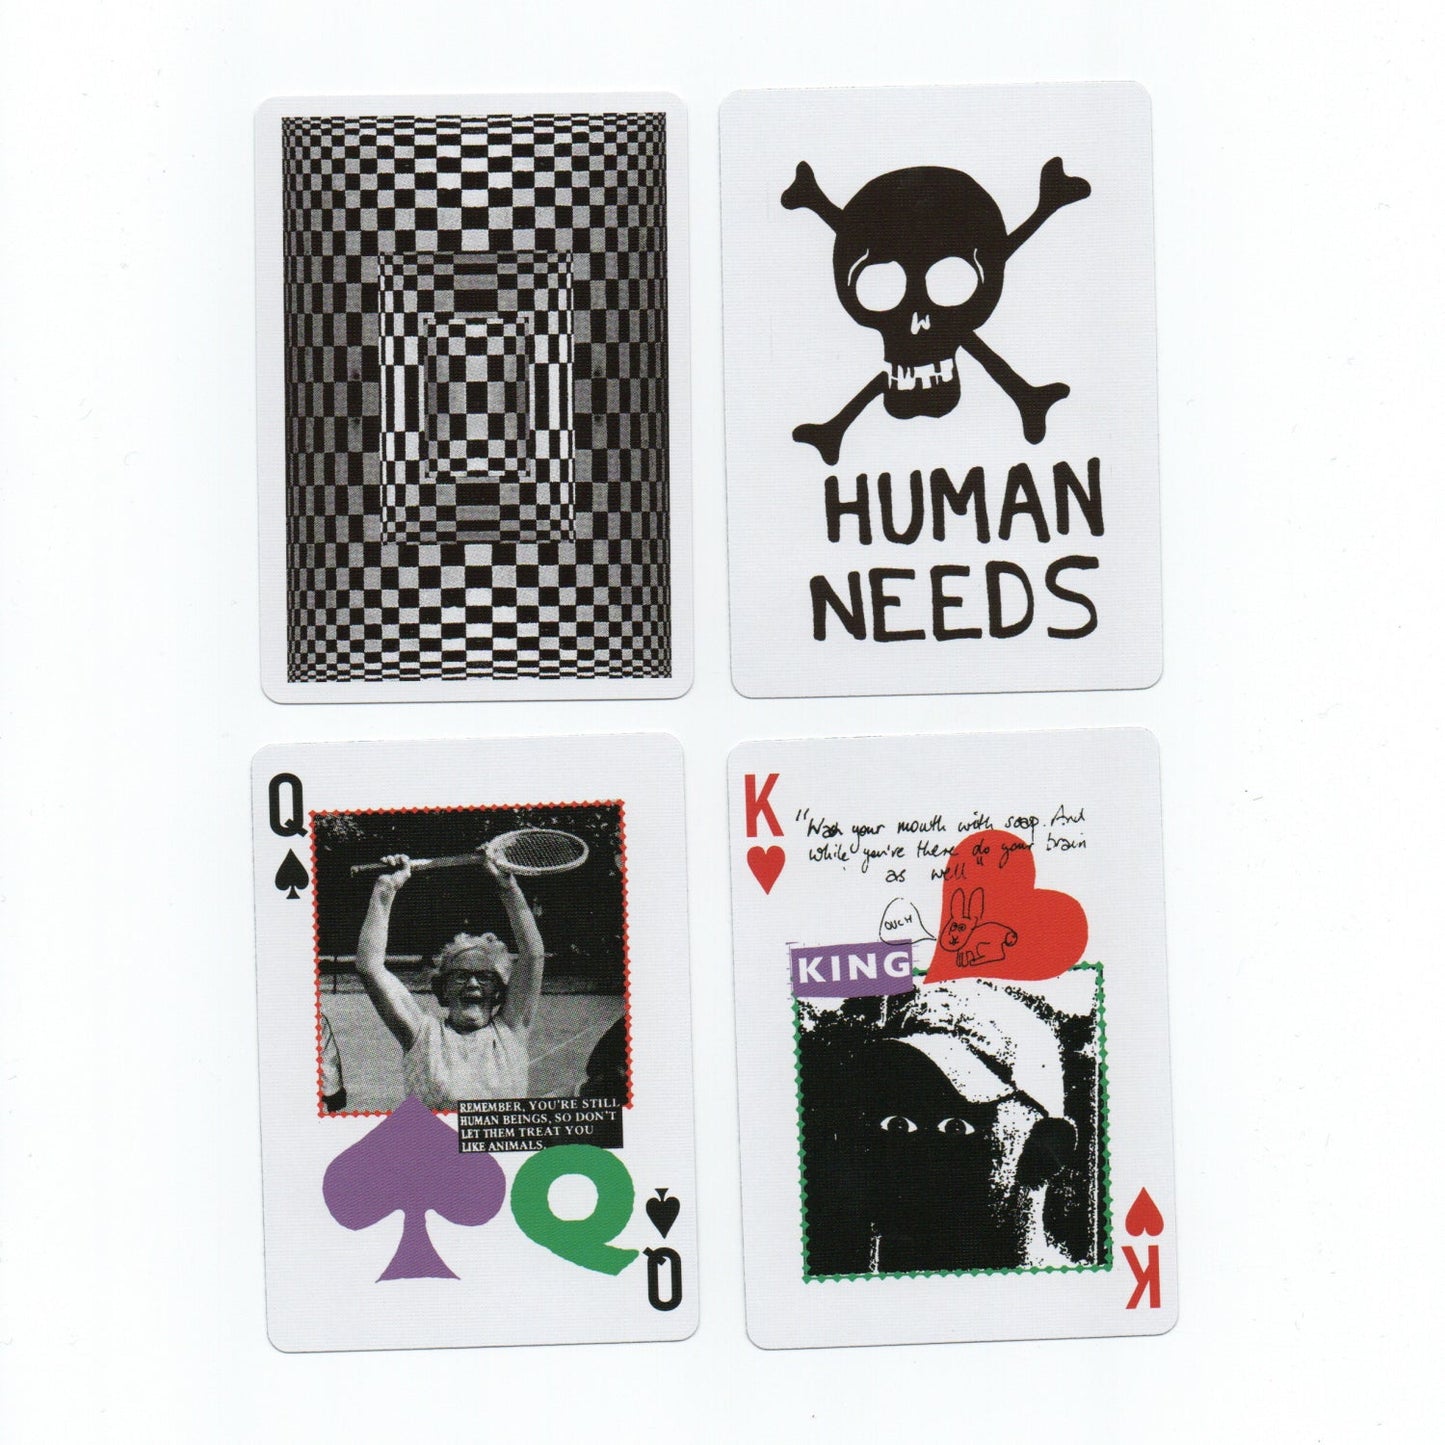 Anyone Worldwide Cardistry Series Playing Cards by Anyone